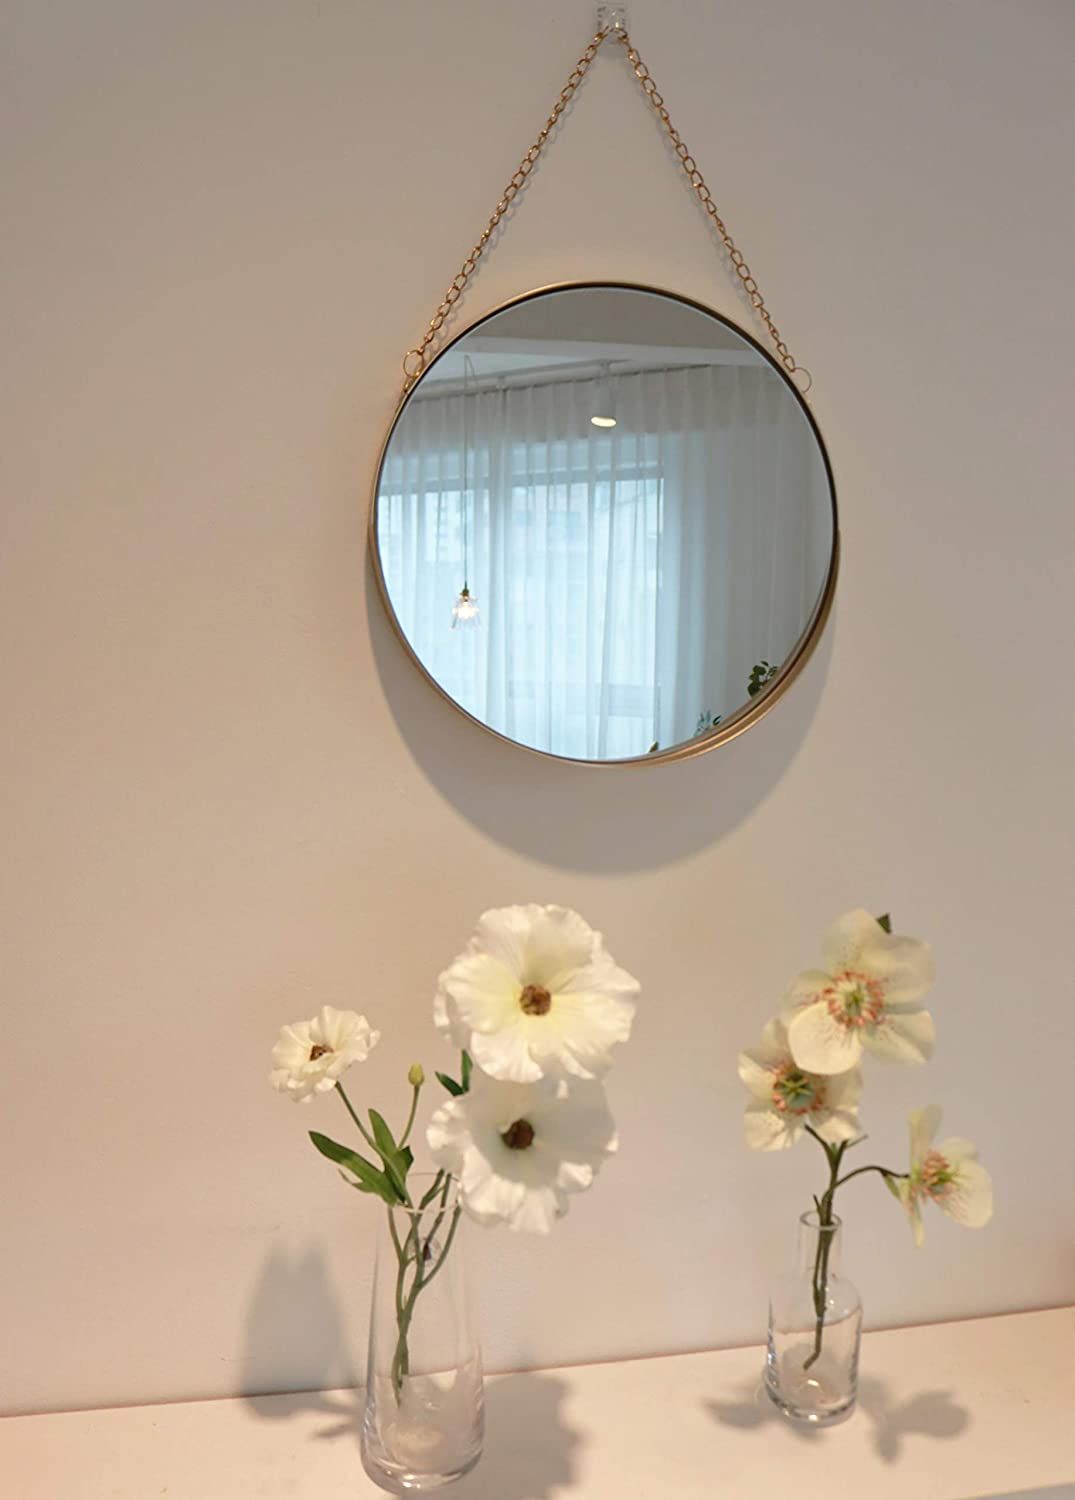 Decorative Hanging Wall Mirror – Small Vintage Mirror For Wall – 10 Regarding Reba Accent Wall Mirrors (View 12 of 15)